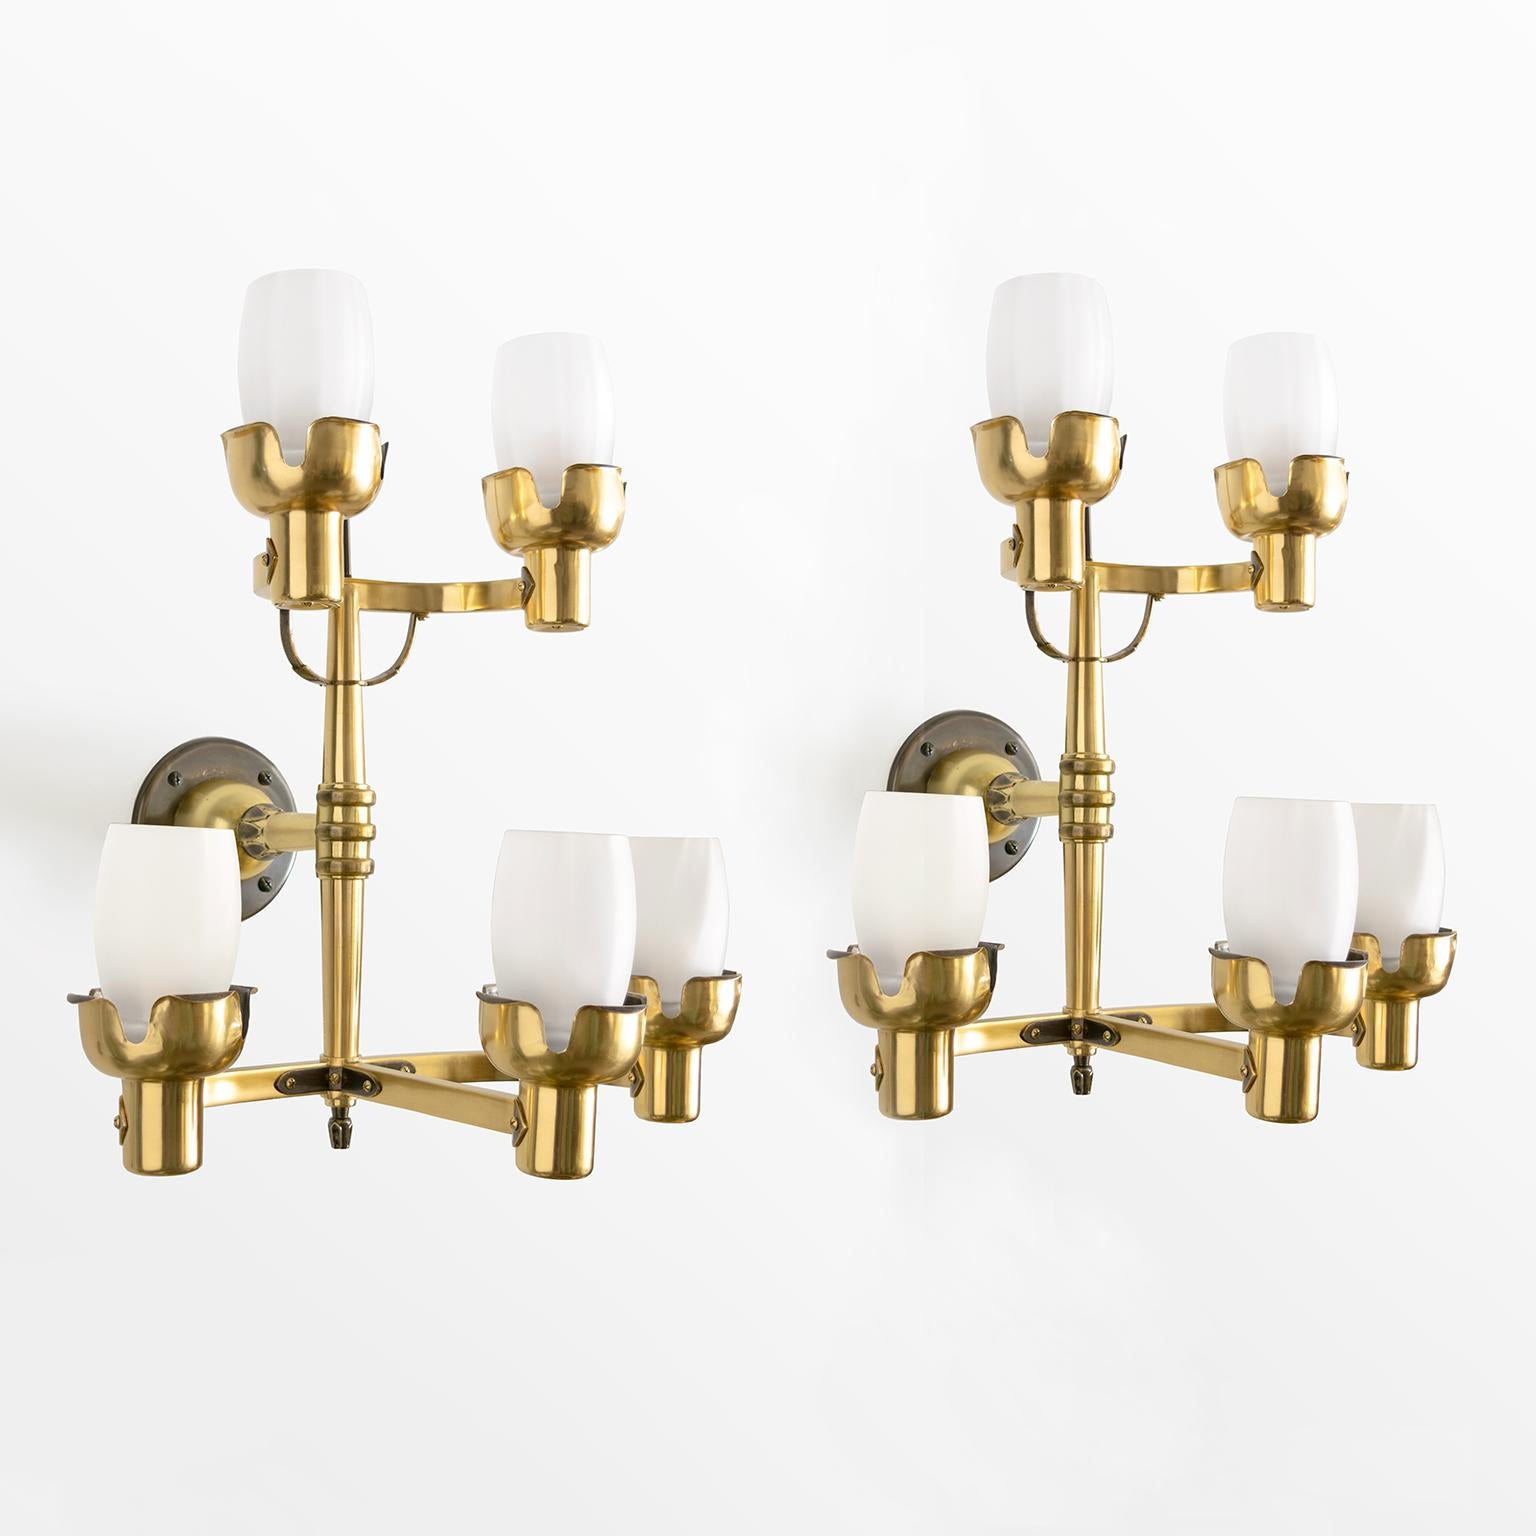 Pair of large Scandinavian Modern polished and patinated brass 5-arm sconces designed (signed) by Knut Hallgren. Made by Bohlmarks AB, Stockholm, Sweden circa 1940’s. Newly restored and rewired for use in the USA with standard Edison base